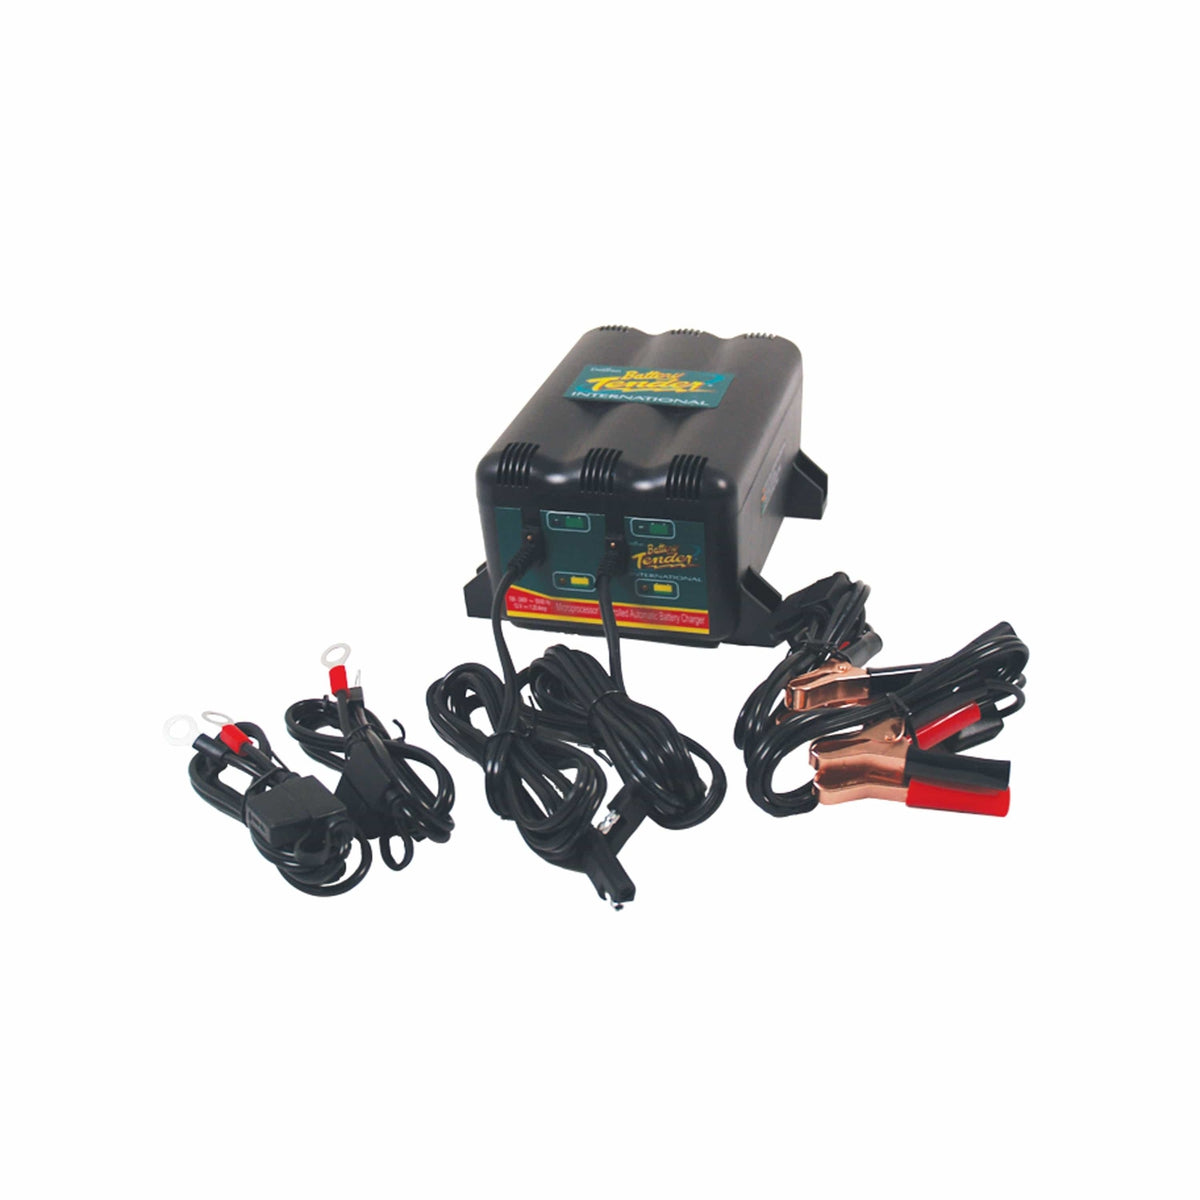 Battery Tender Two-Bank Battery Charging Station 12v 1.25a #022-0165